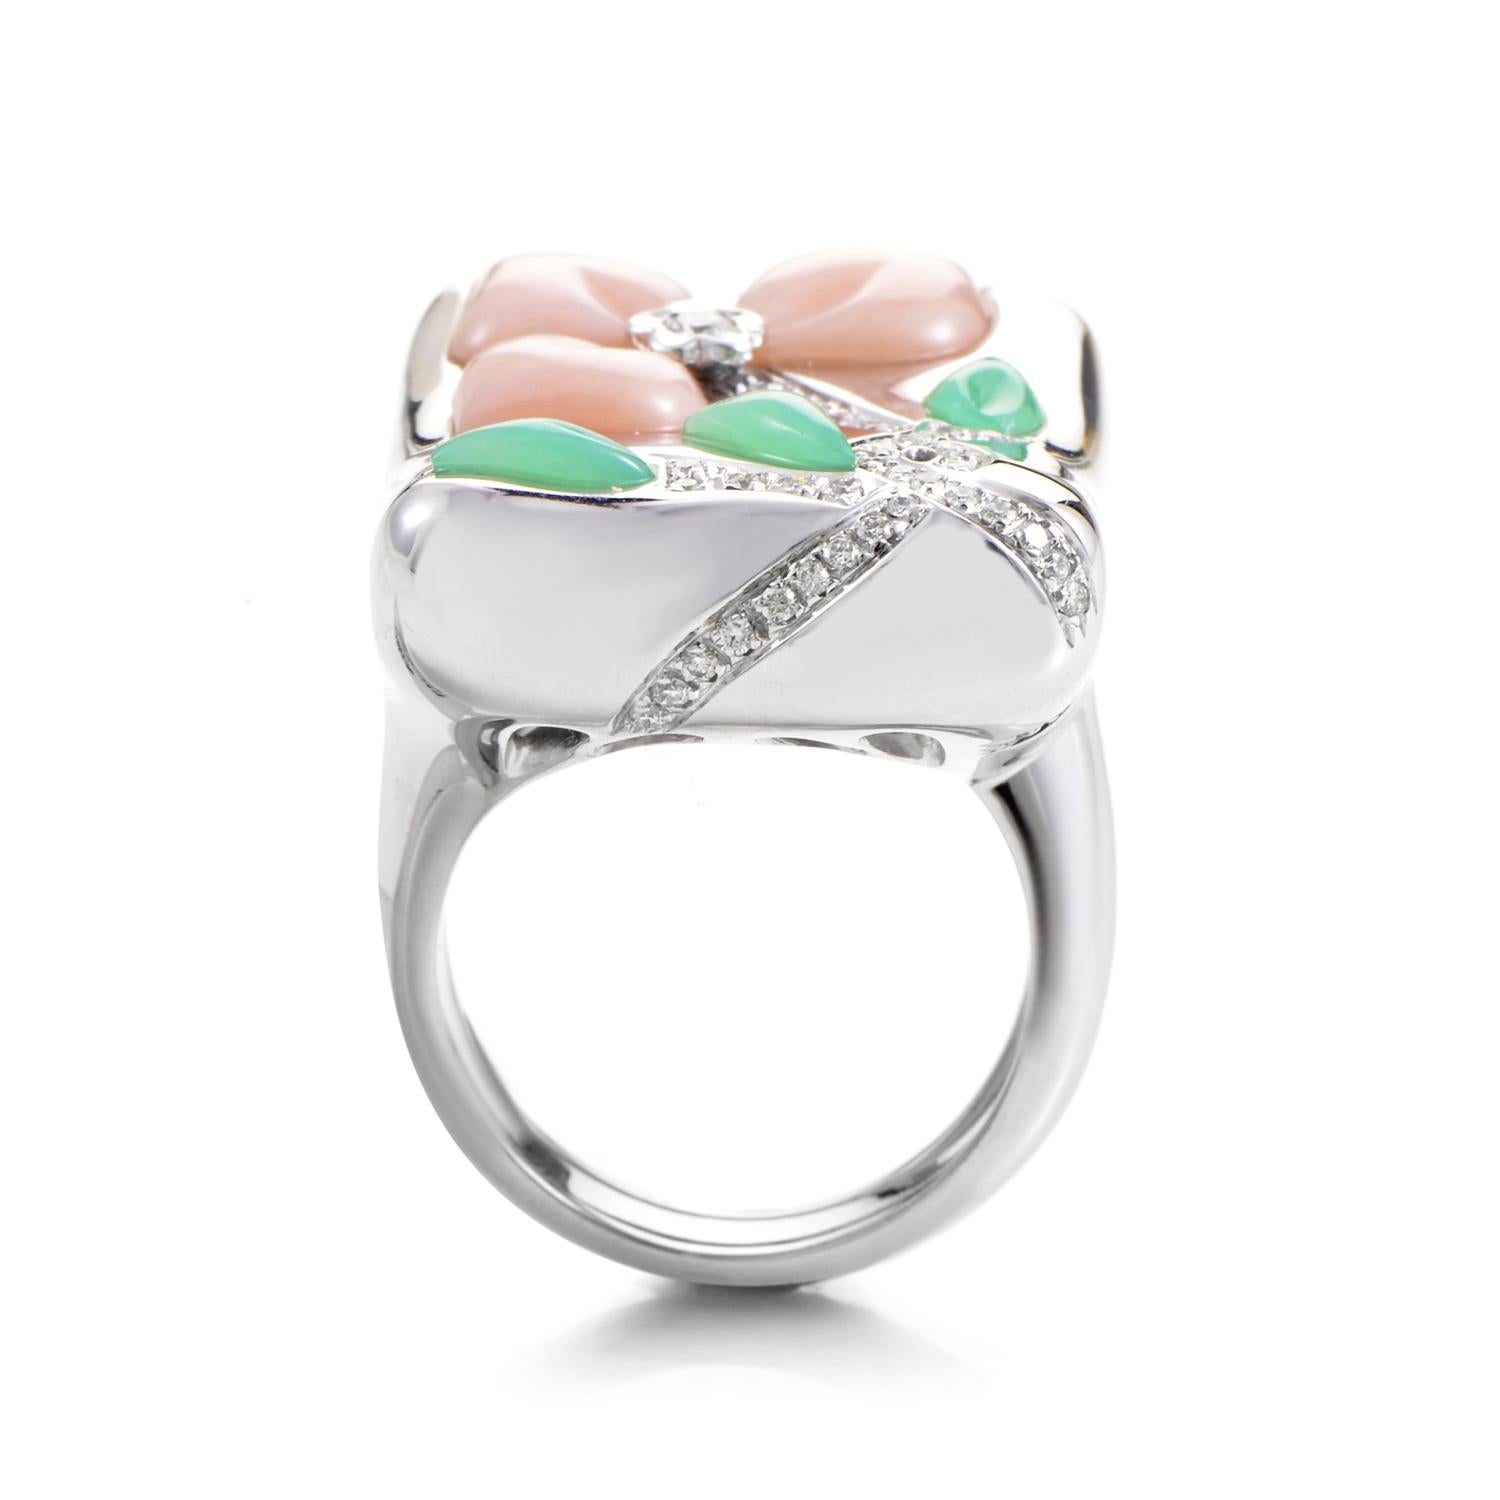 With the pleasing nuances of the magnificent jade and coral stones adorning the top of the 18K white gold body in a lovely floral decoration, this splendid ring from Oro Trend is also graced with the sparkle of diamonds totaling 0.40ct.
